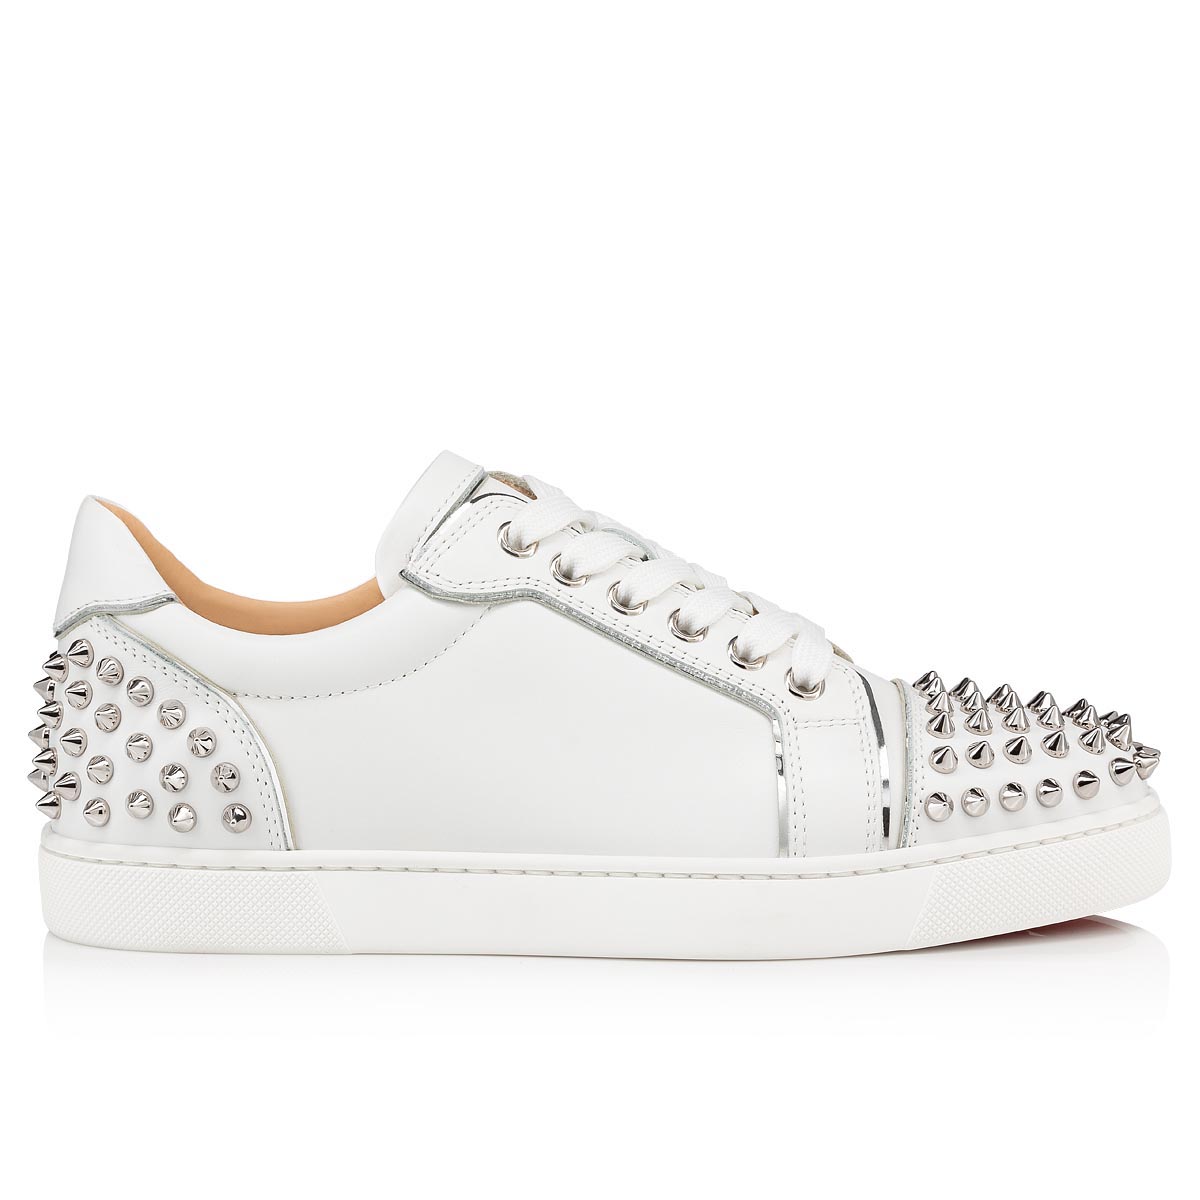 Christian Louboutin Vieria sneakers in leather and studs